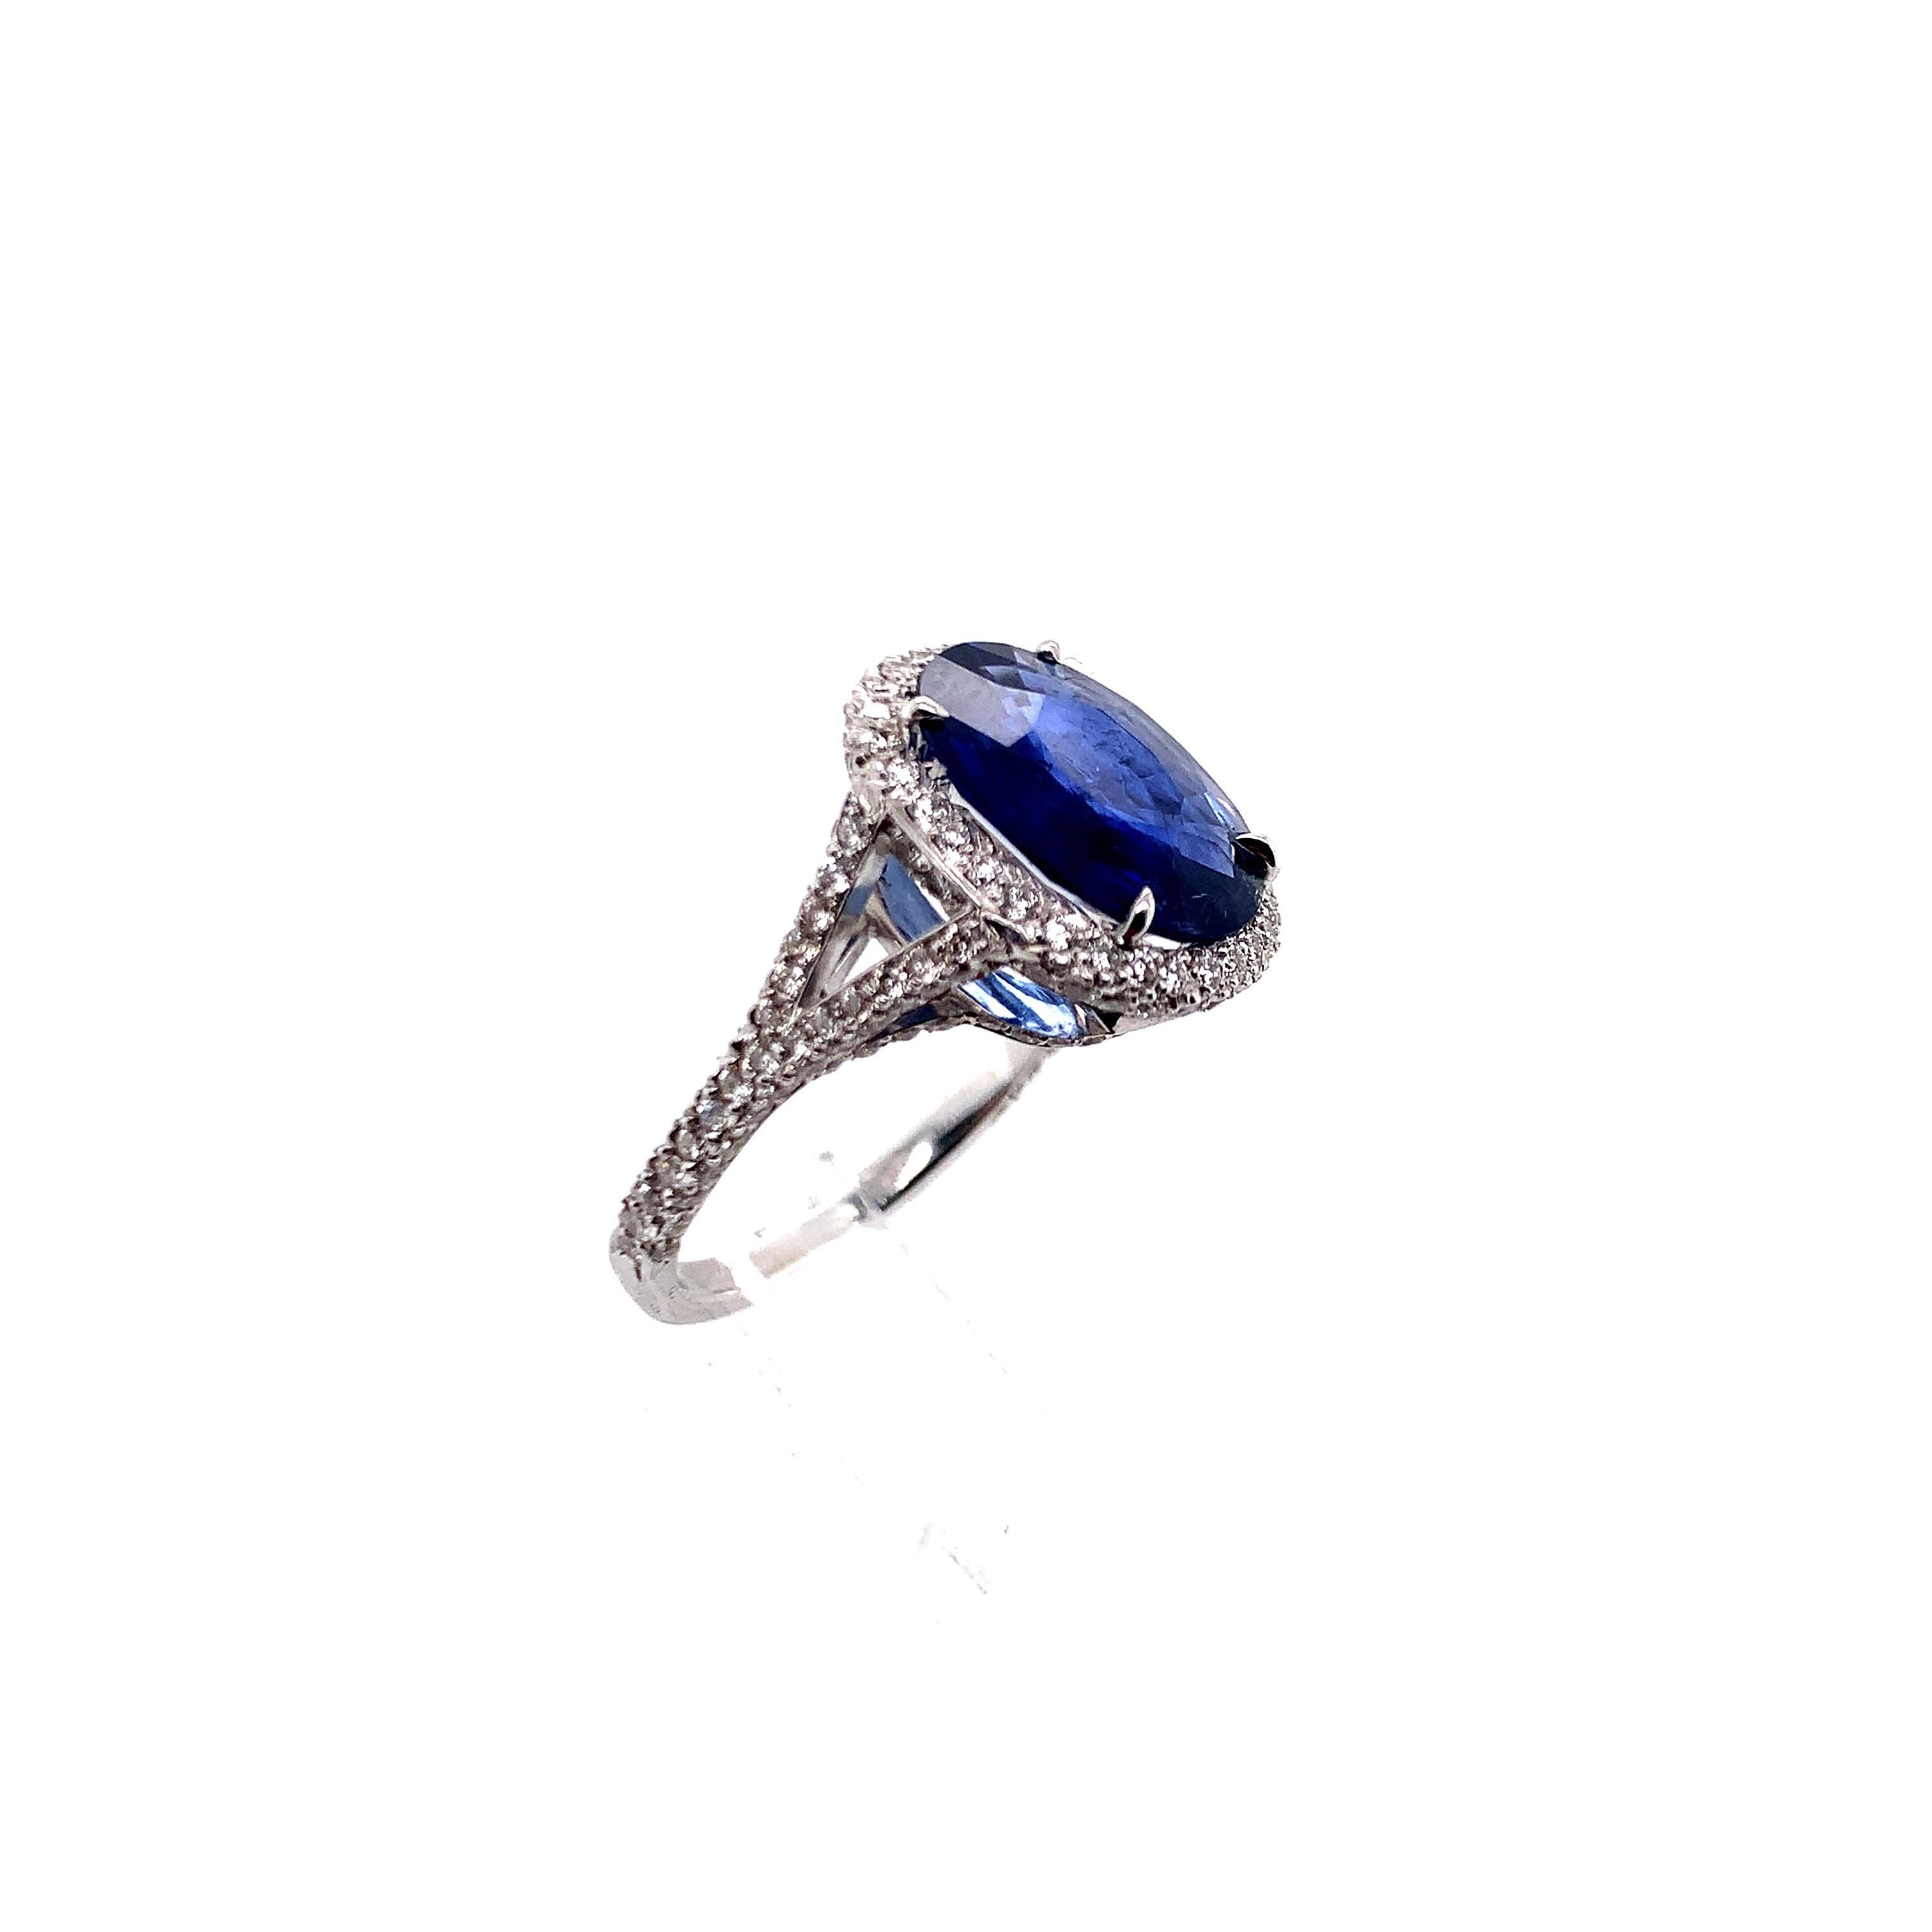 A beautiful 4.41 carat oval sapphire surrounded by approximately 1.5 carat round-cut diamonds in an 18k white gold. 